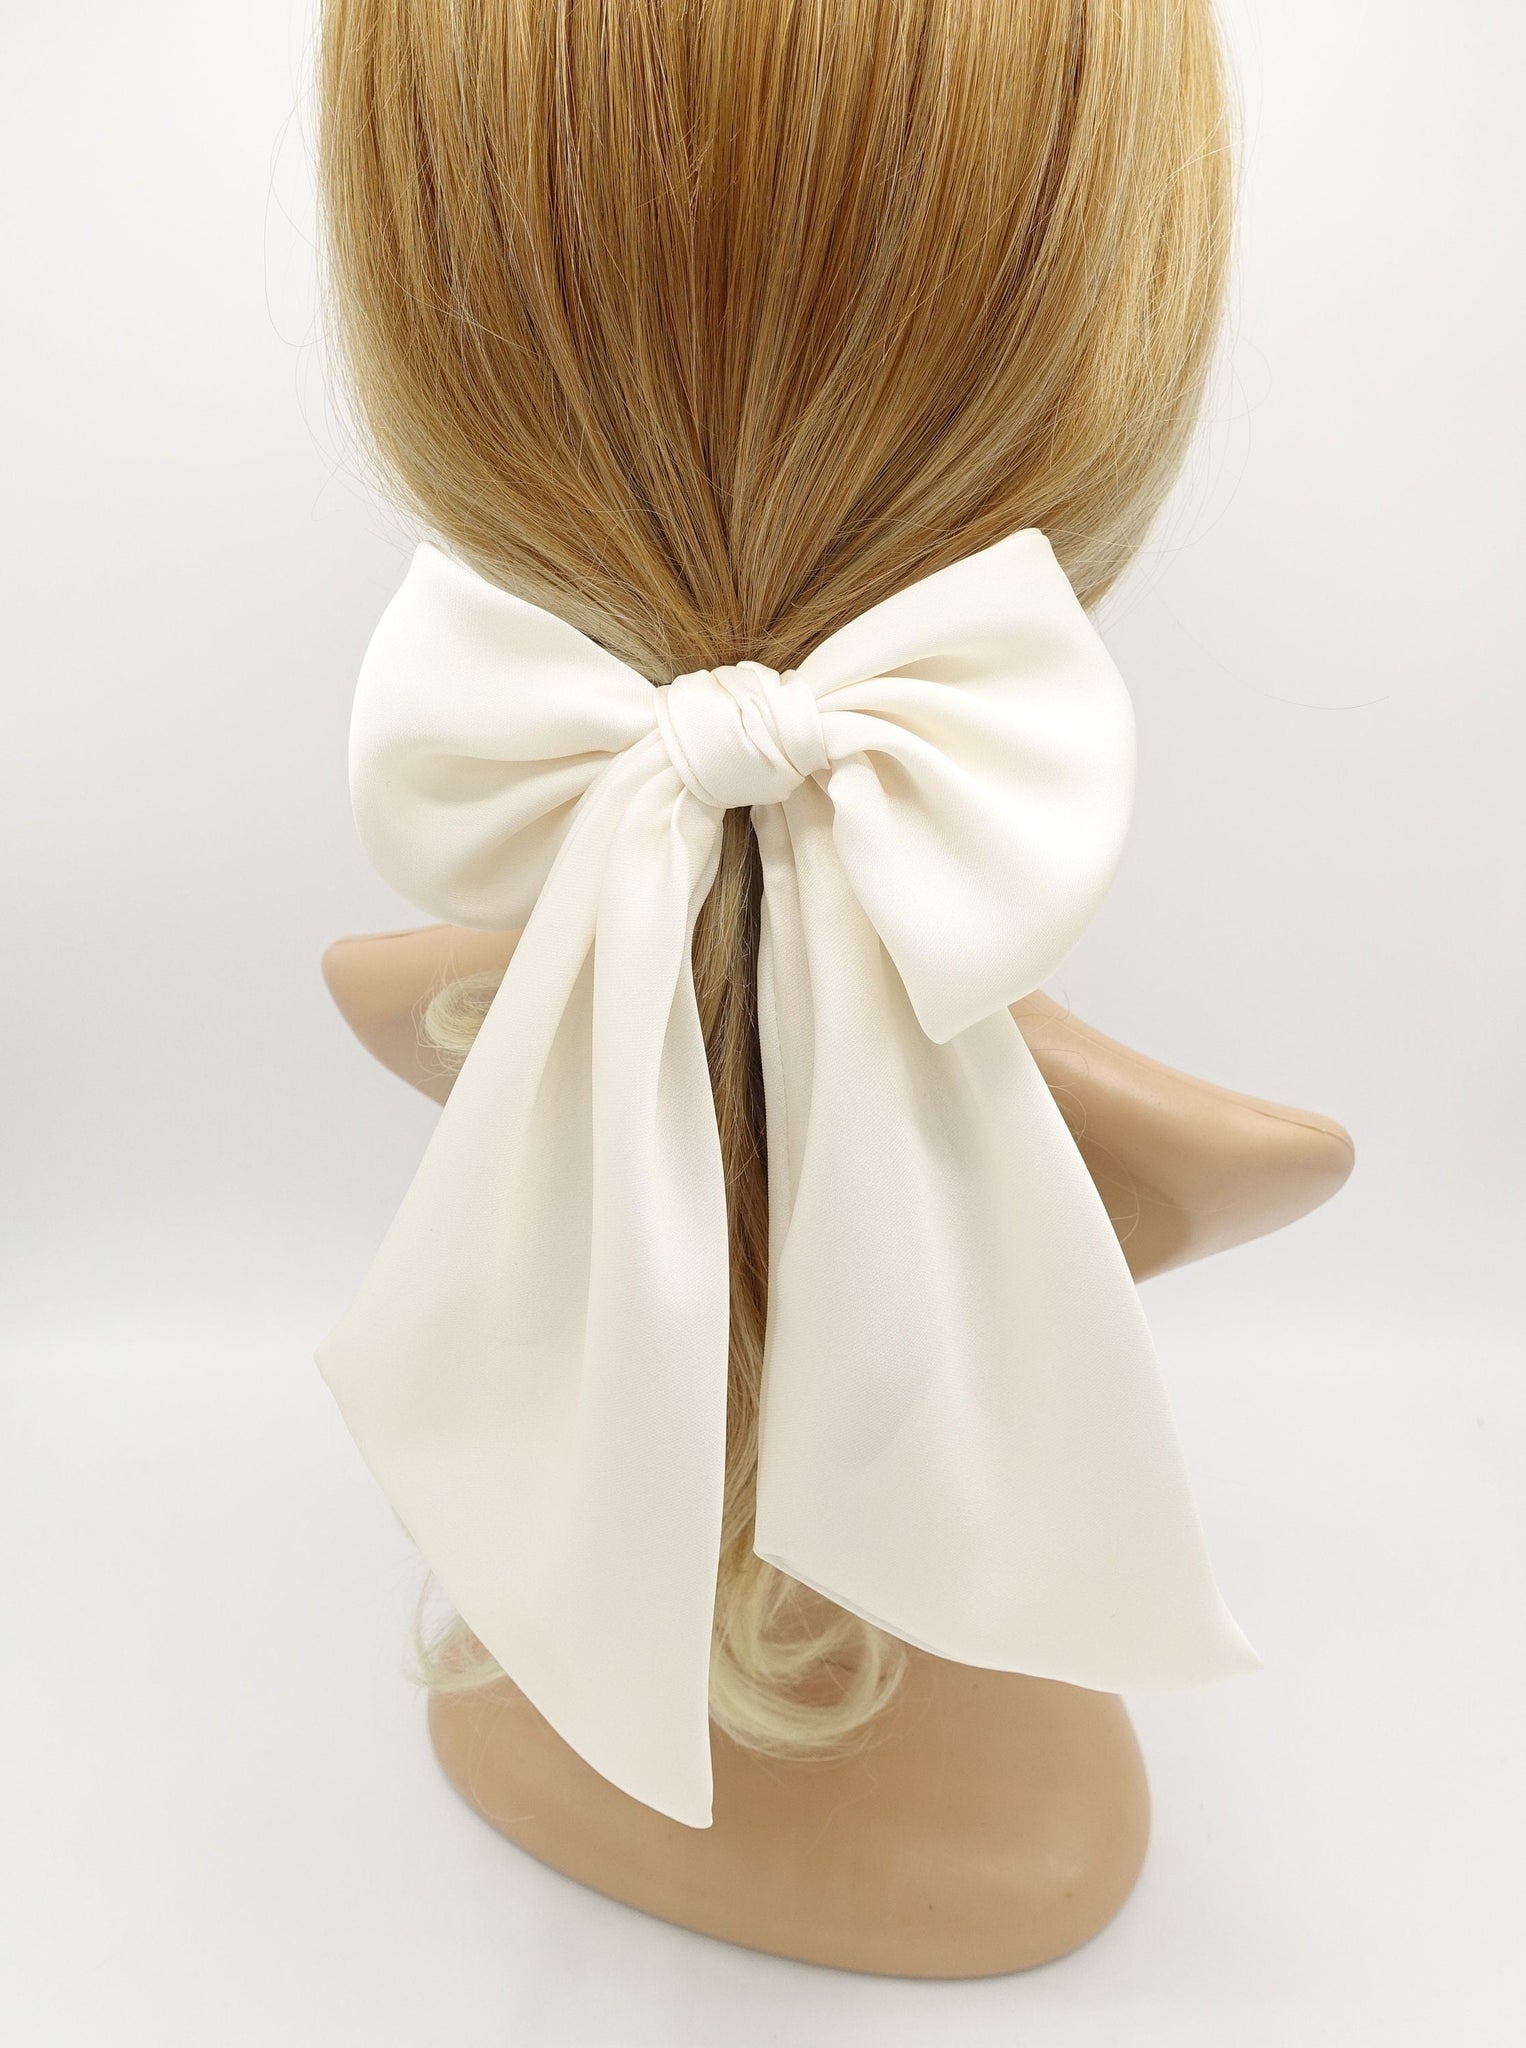 veryshine.com Ponytail holders Cream white glossy satin bow knot long tail hair tie solid color ponytail holder women hair elastic